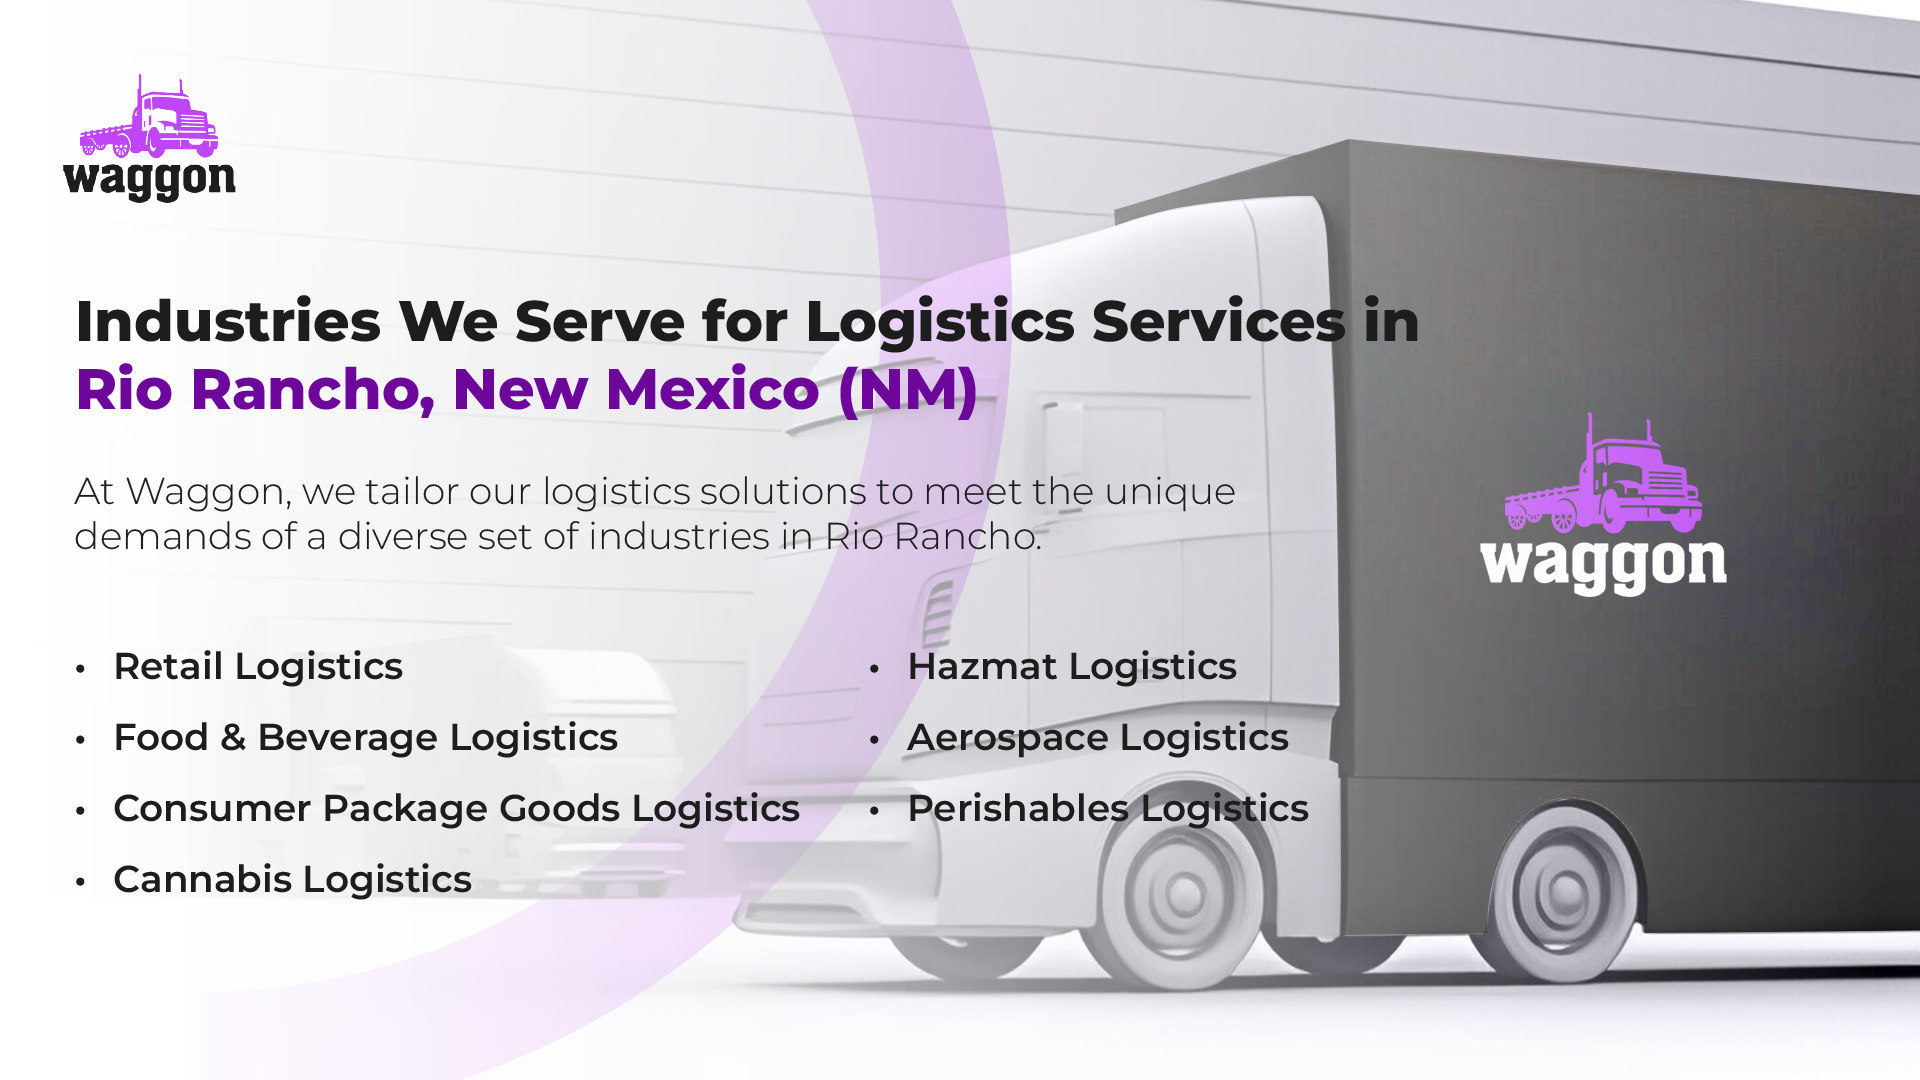 Industries We Serve for Logistics Services in Rio Rancho, New Mexico (NM)